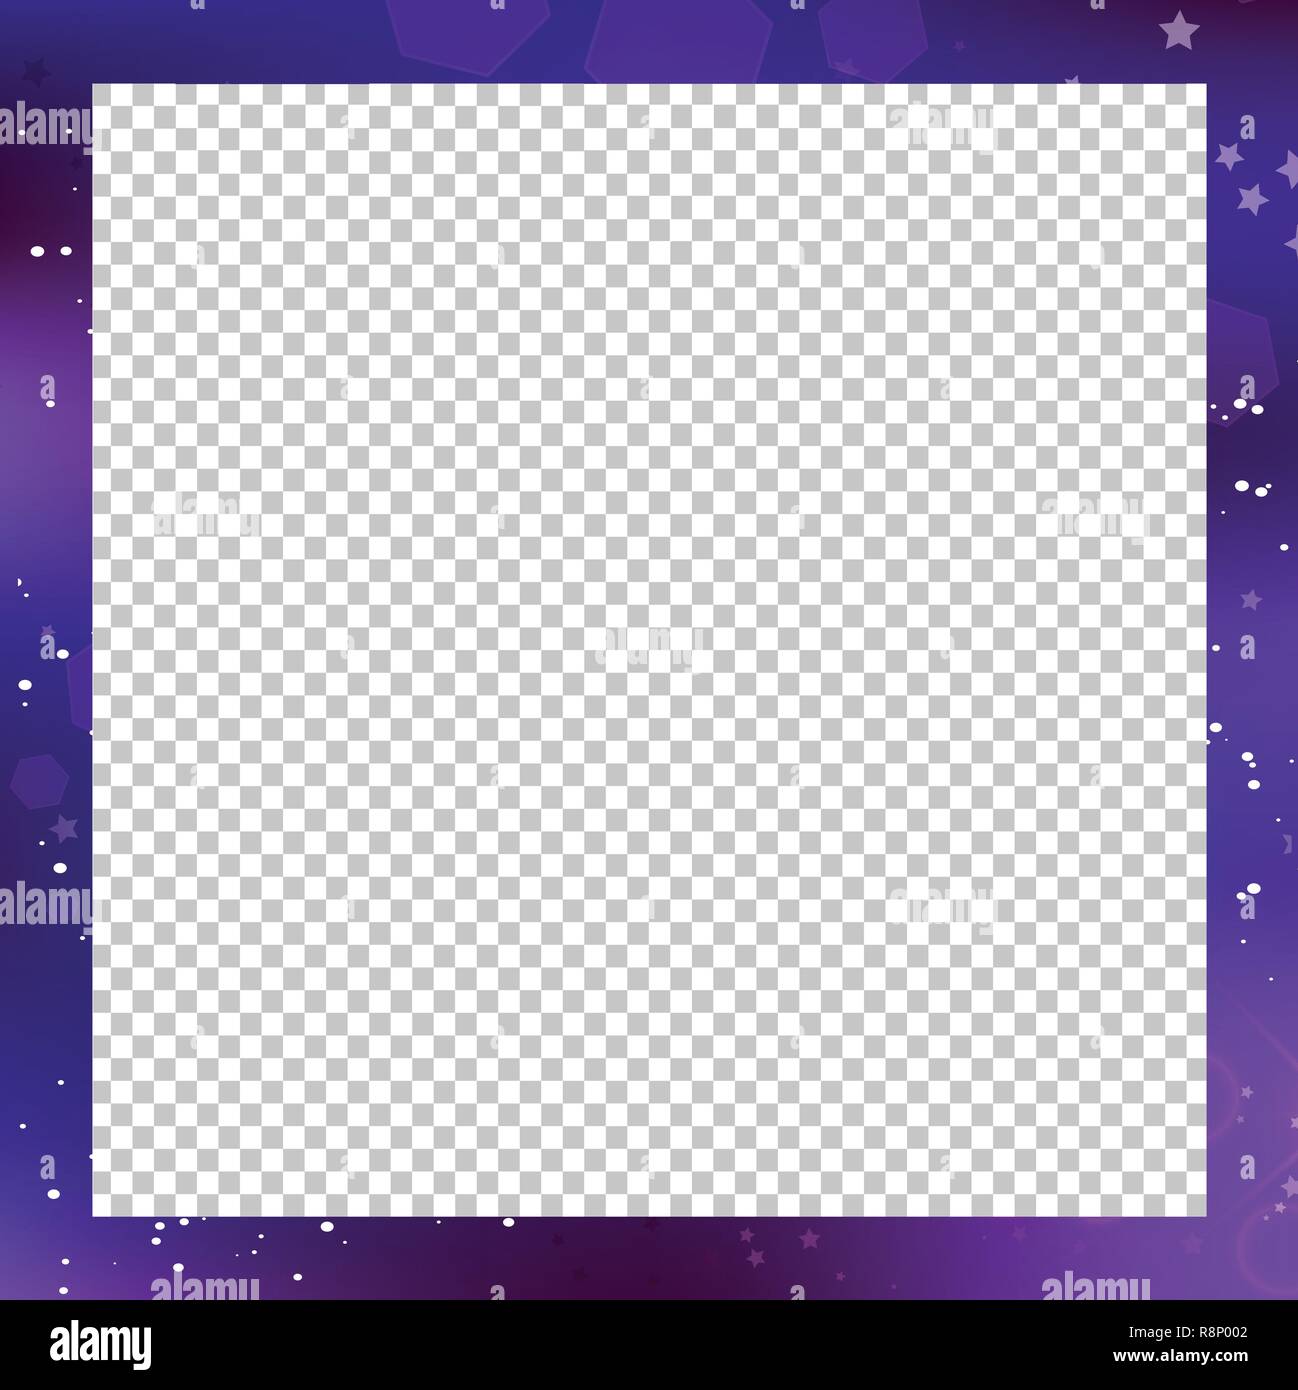 Vector Fantastic Galaxy Square Border On Transparent Background